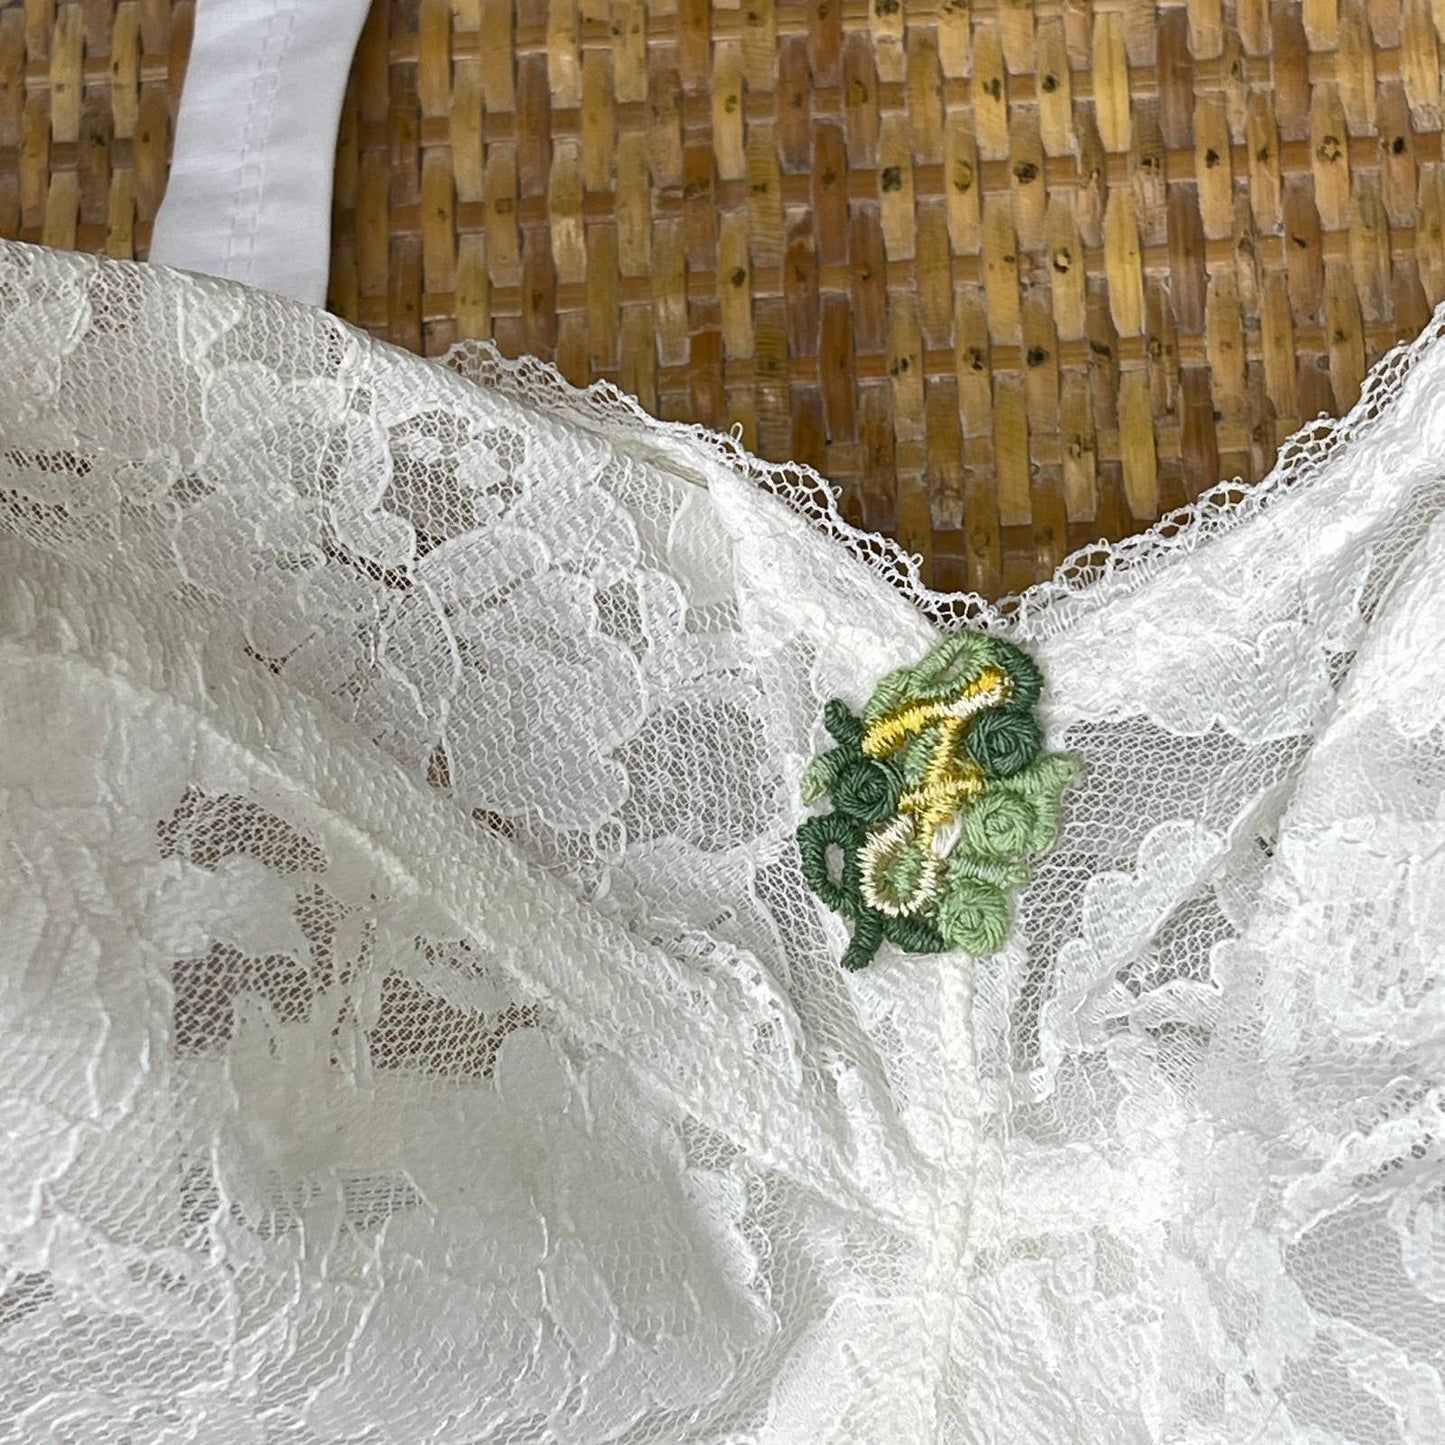 Vintage 60s White Lace Bullet Bra with Embroidered Flower by Figurettes Size 32F